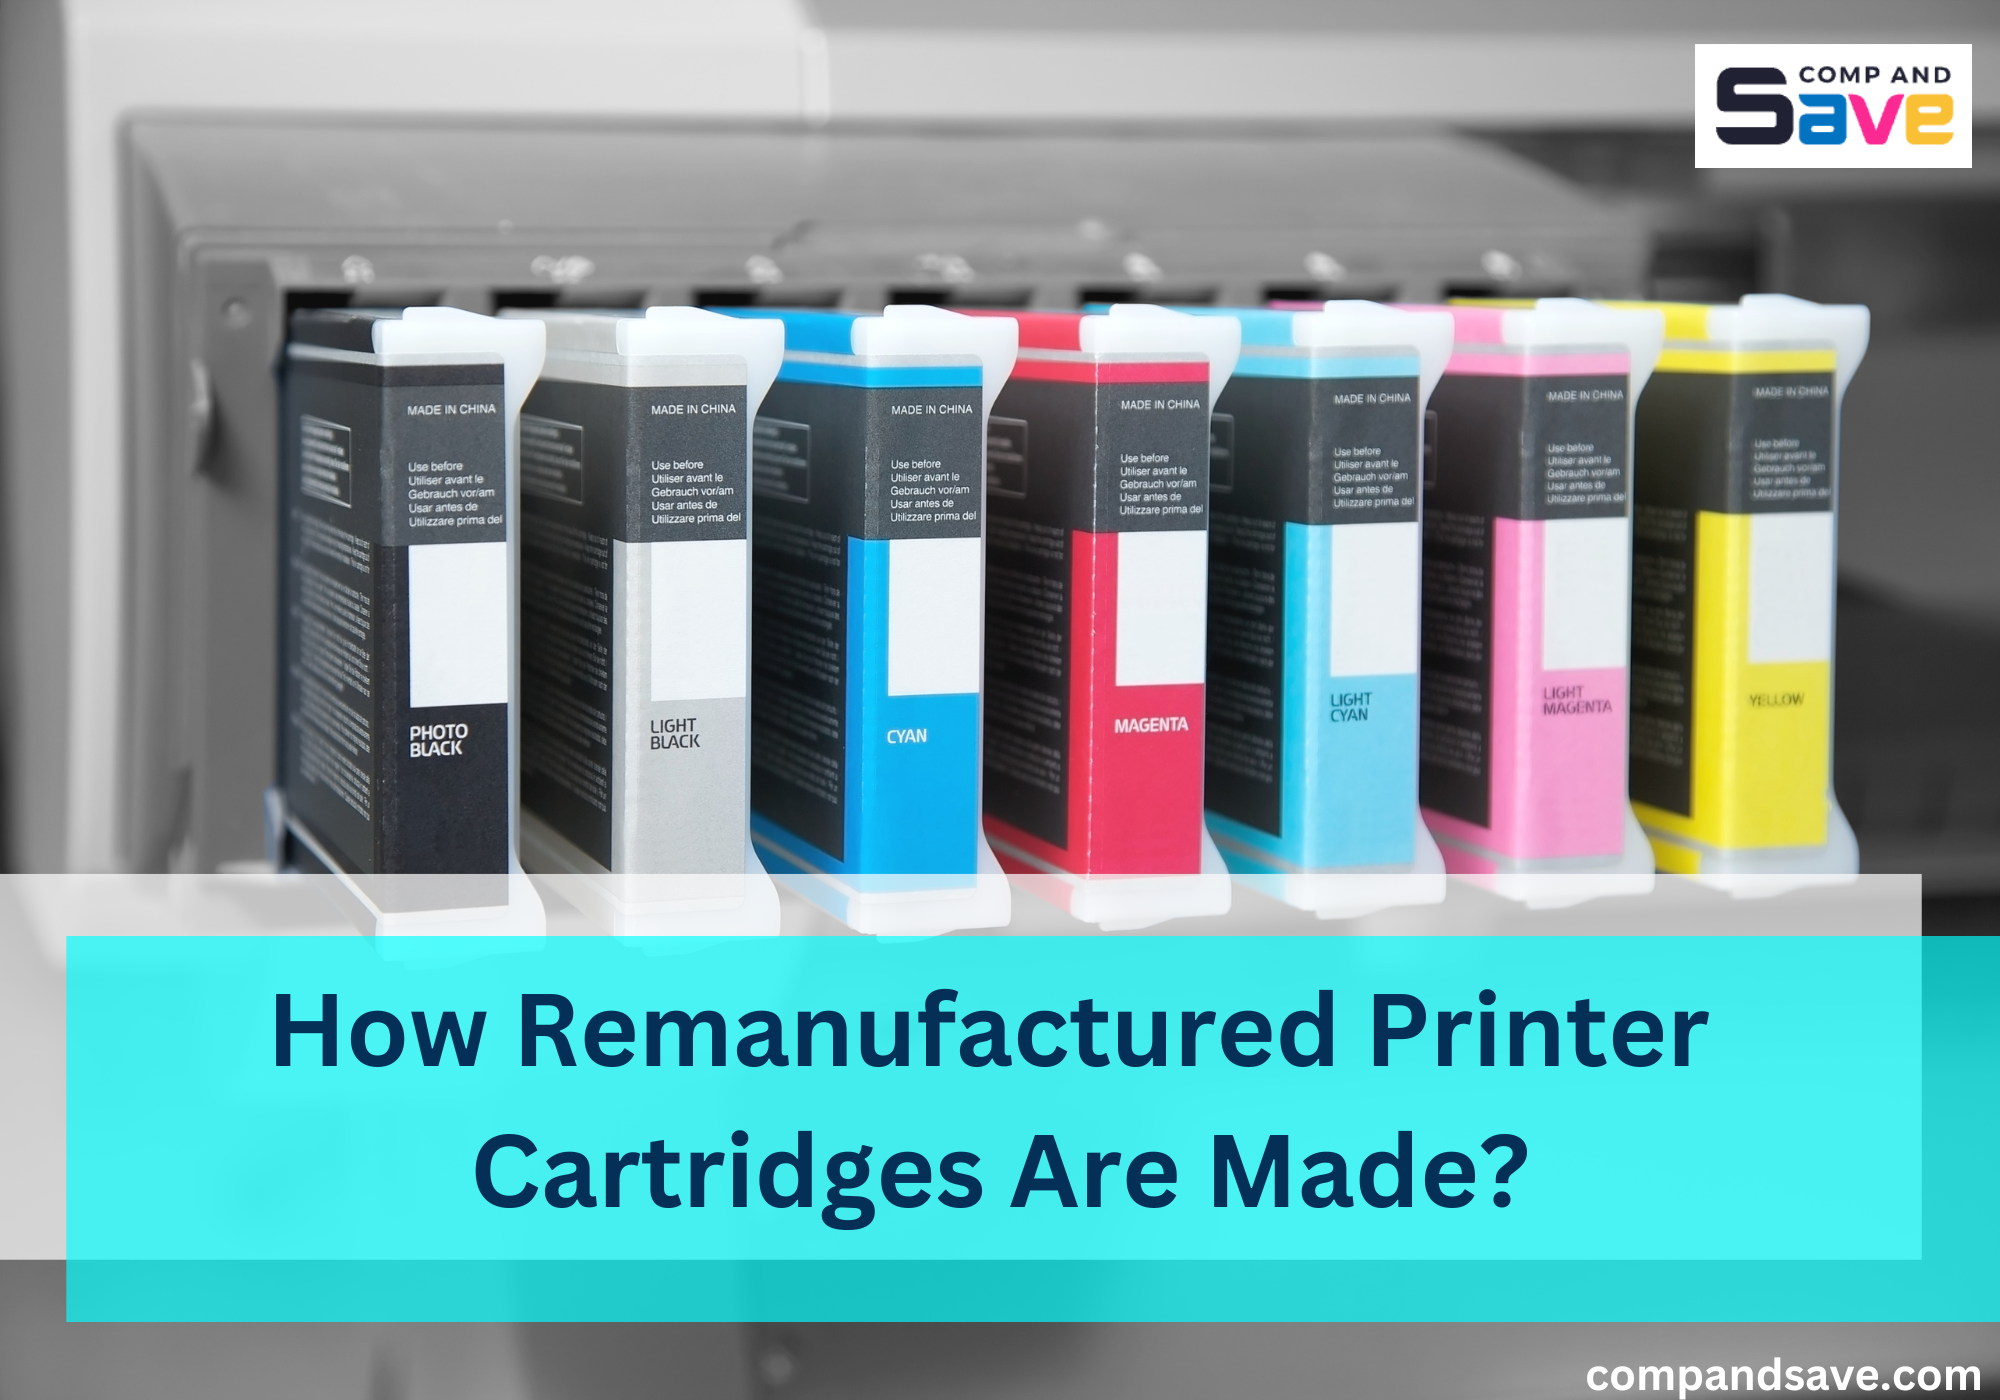 image from Remanufactured Printer Cartridges: How Are They Made?